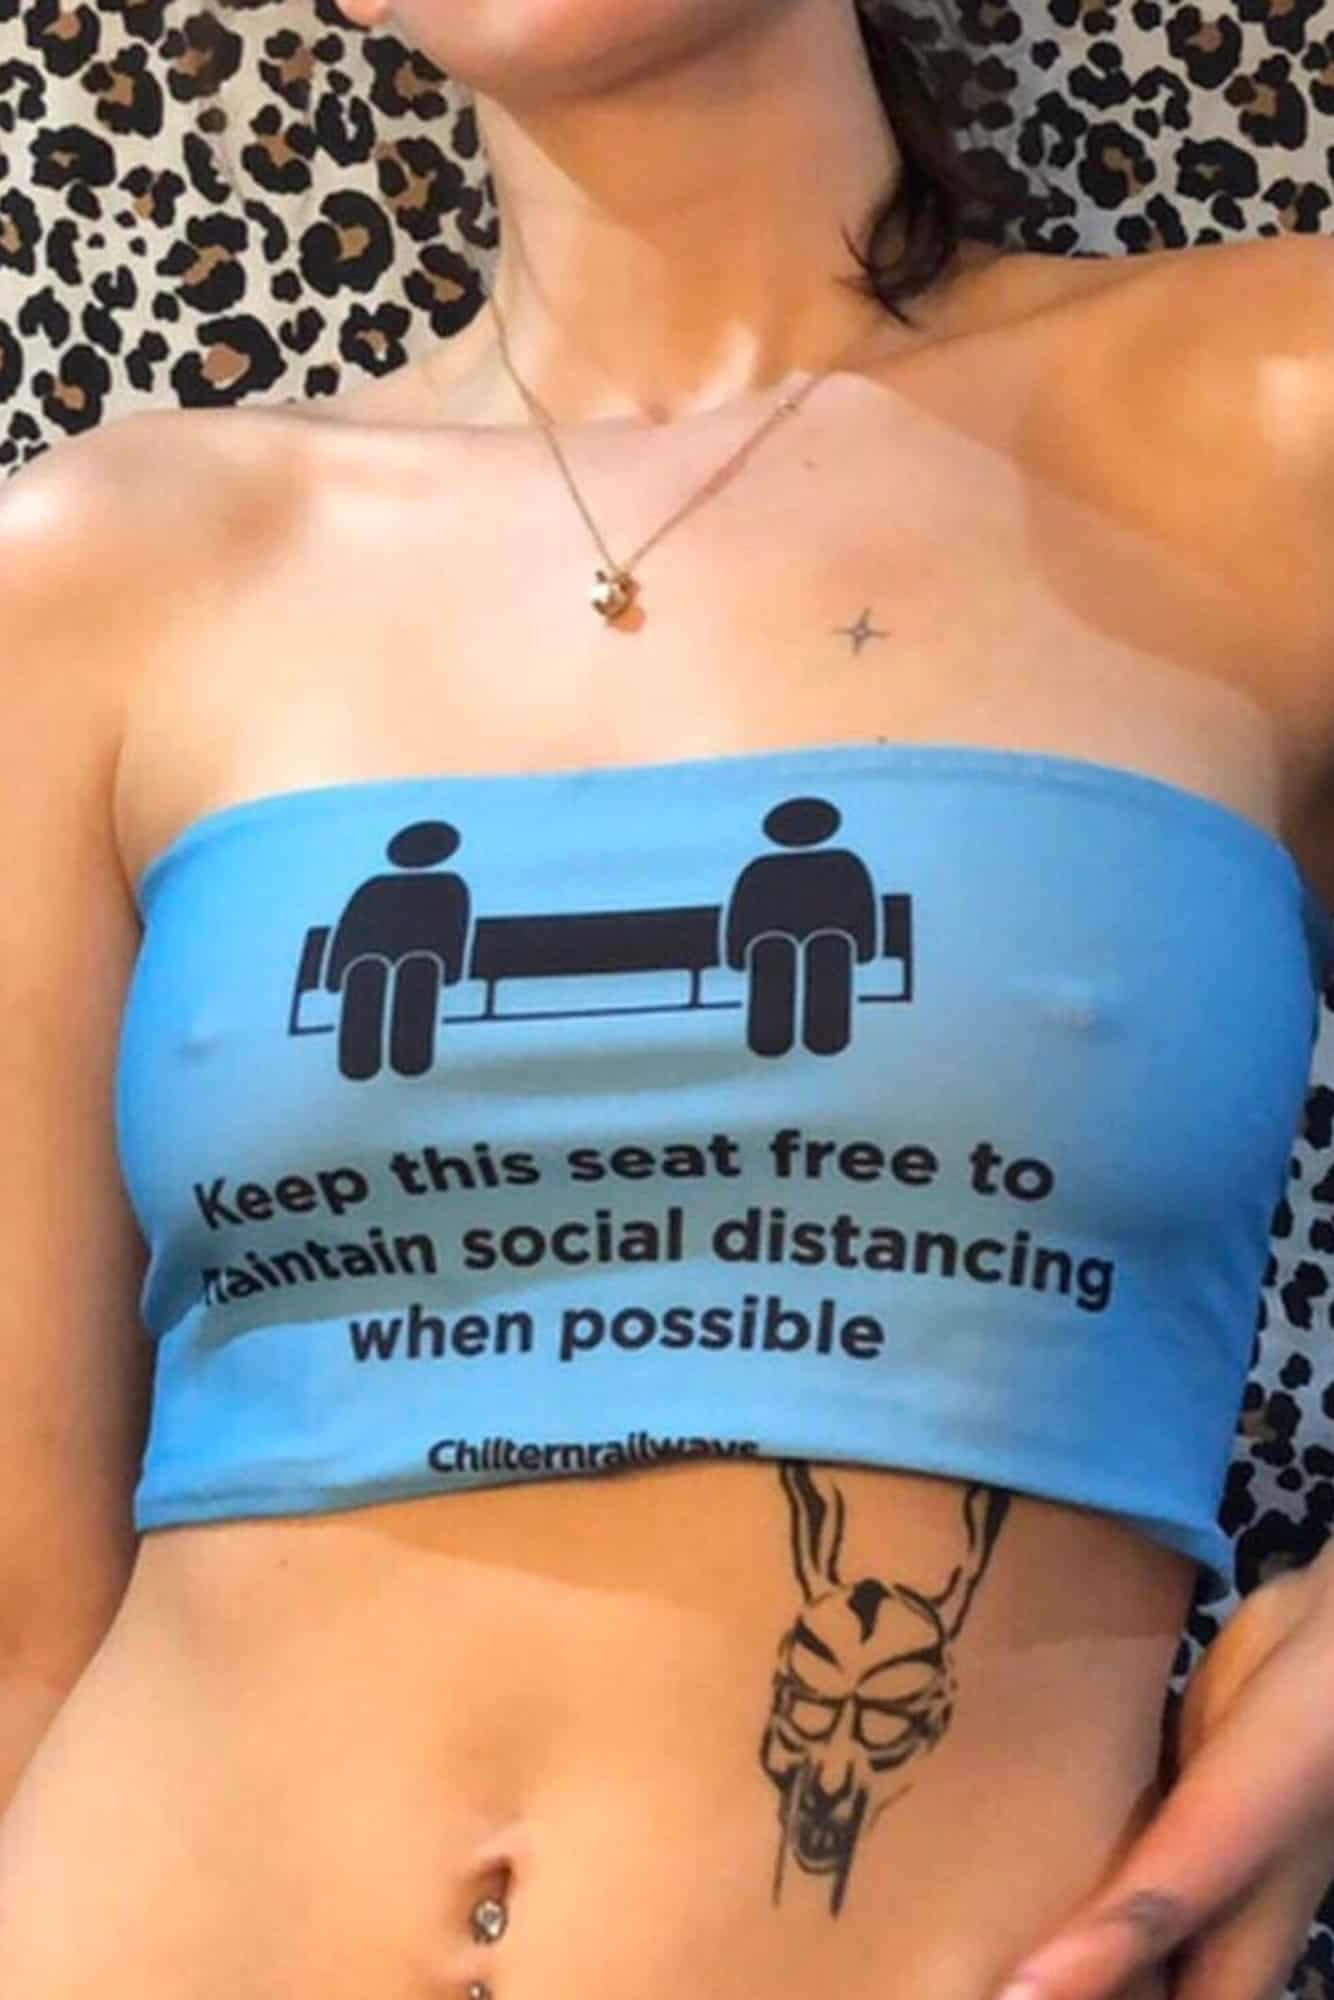 A train sign turned into a crop top